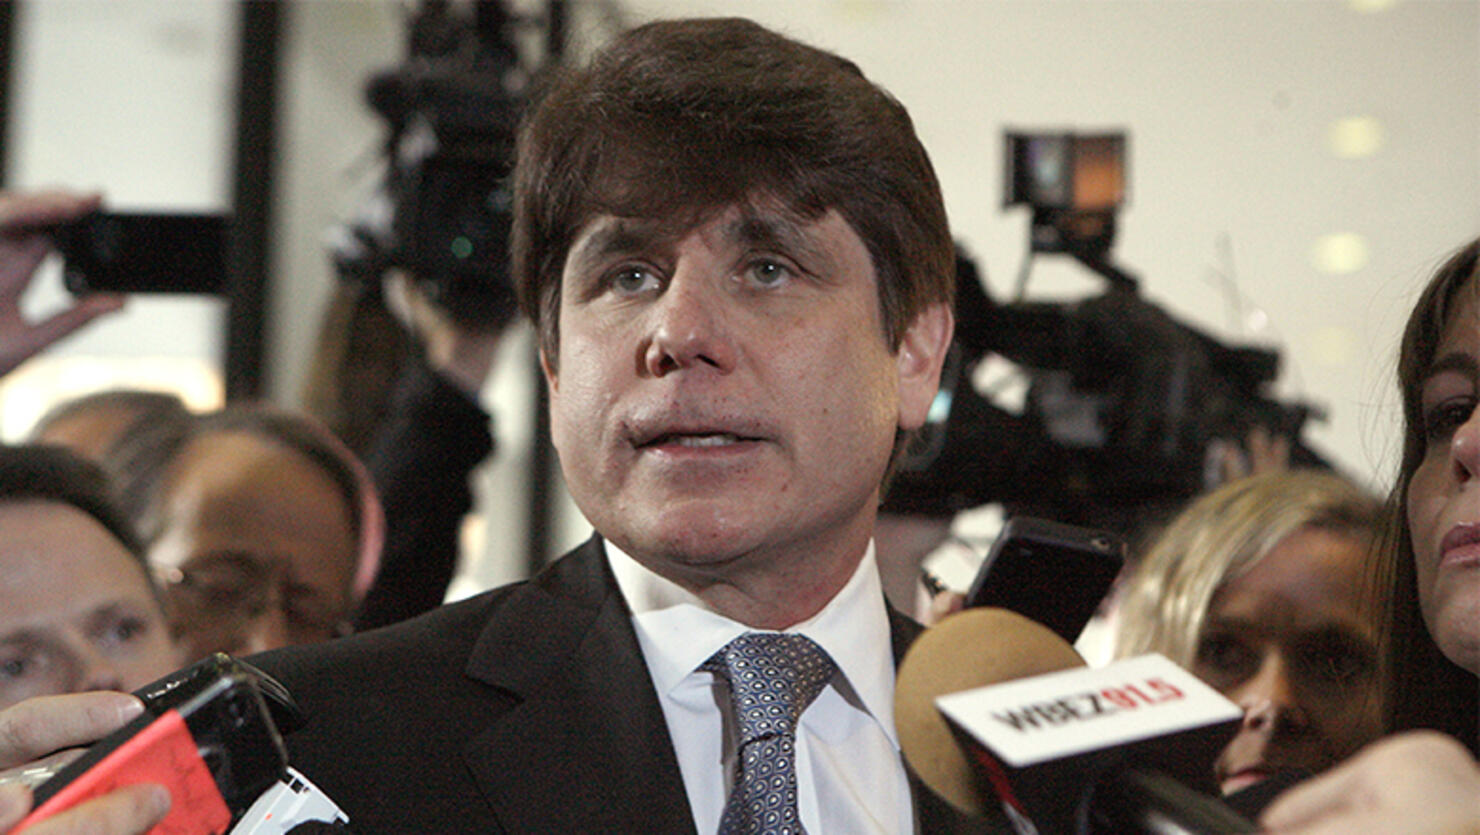 Rod Blagojevich Sentencing In Corruption Trial